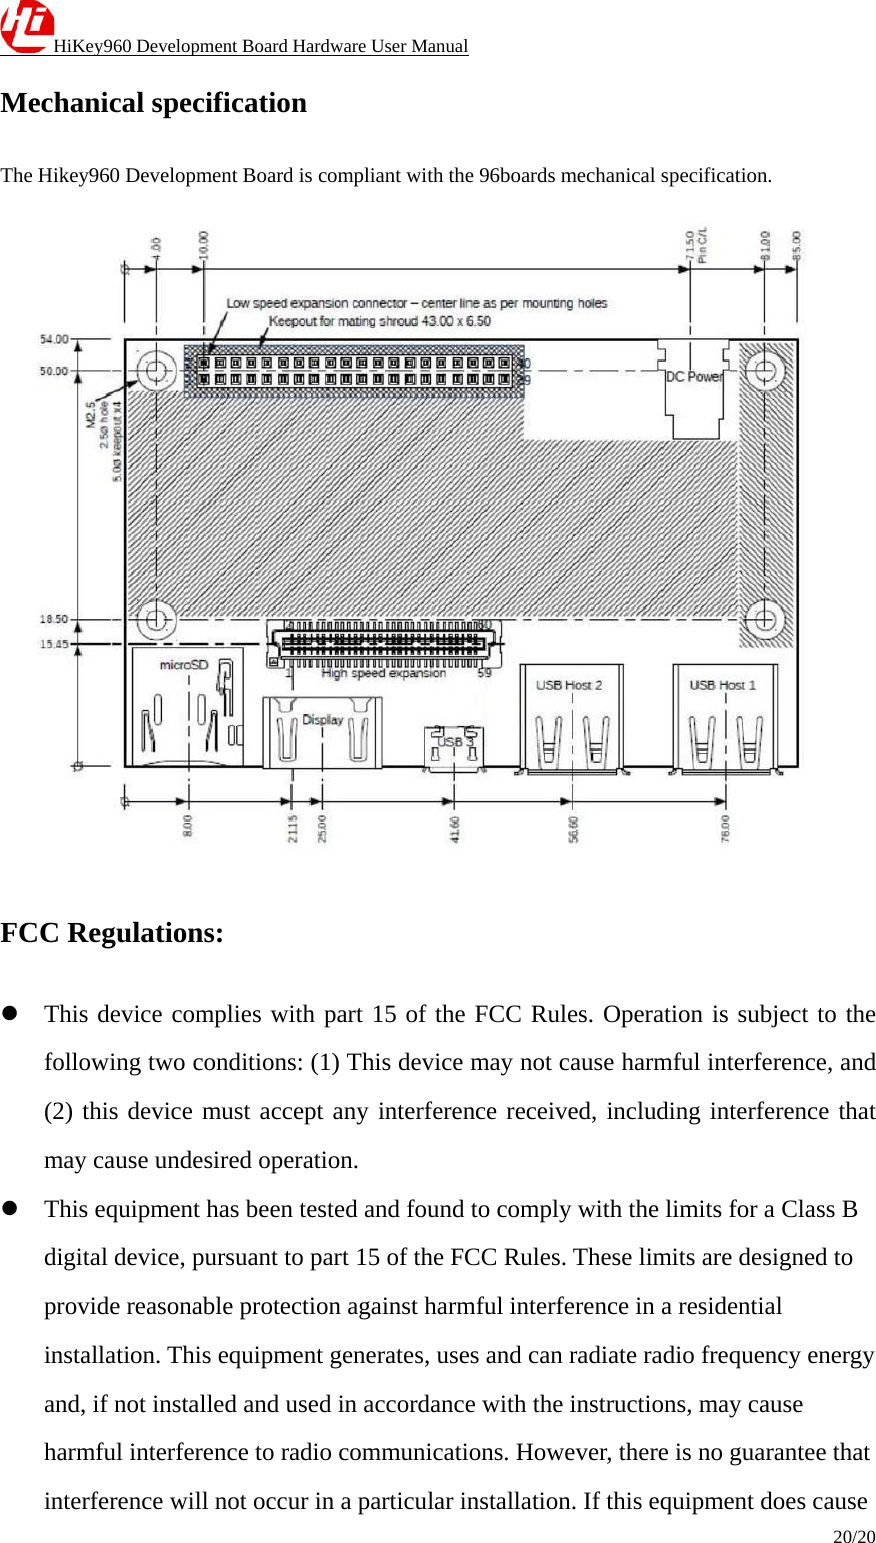 HiKey960 Development Board Hardware User Manual 20/20  Mechanical specification The Hikey960 Development Board is compliant with the 96boards mechanical specification.  FCC Regulations:  This device complies with part 15 of the FCC Rules. Operation is subject to the following two conditions: (1) This device may not cause harmful interference, and (2) this device must accept any interference received, including interference that may cause undesired operation.  This equipment has been tested and found to comply with the limits for a Class B digital device, pursuant to part 15 of the FCC Rules. These limits are designed to provide reasonable protection against harmful interference in a residential installation. This equipment generates, uses and can radiate radio frequency energy and, if not installed and used in accordance with the instructions, may cause harmful interference to radio communications. However, there is no guarantee that interference will not occur in a particular installation. If this equipment does cause 